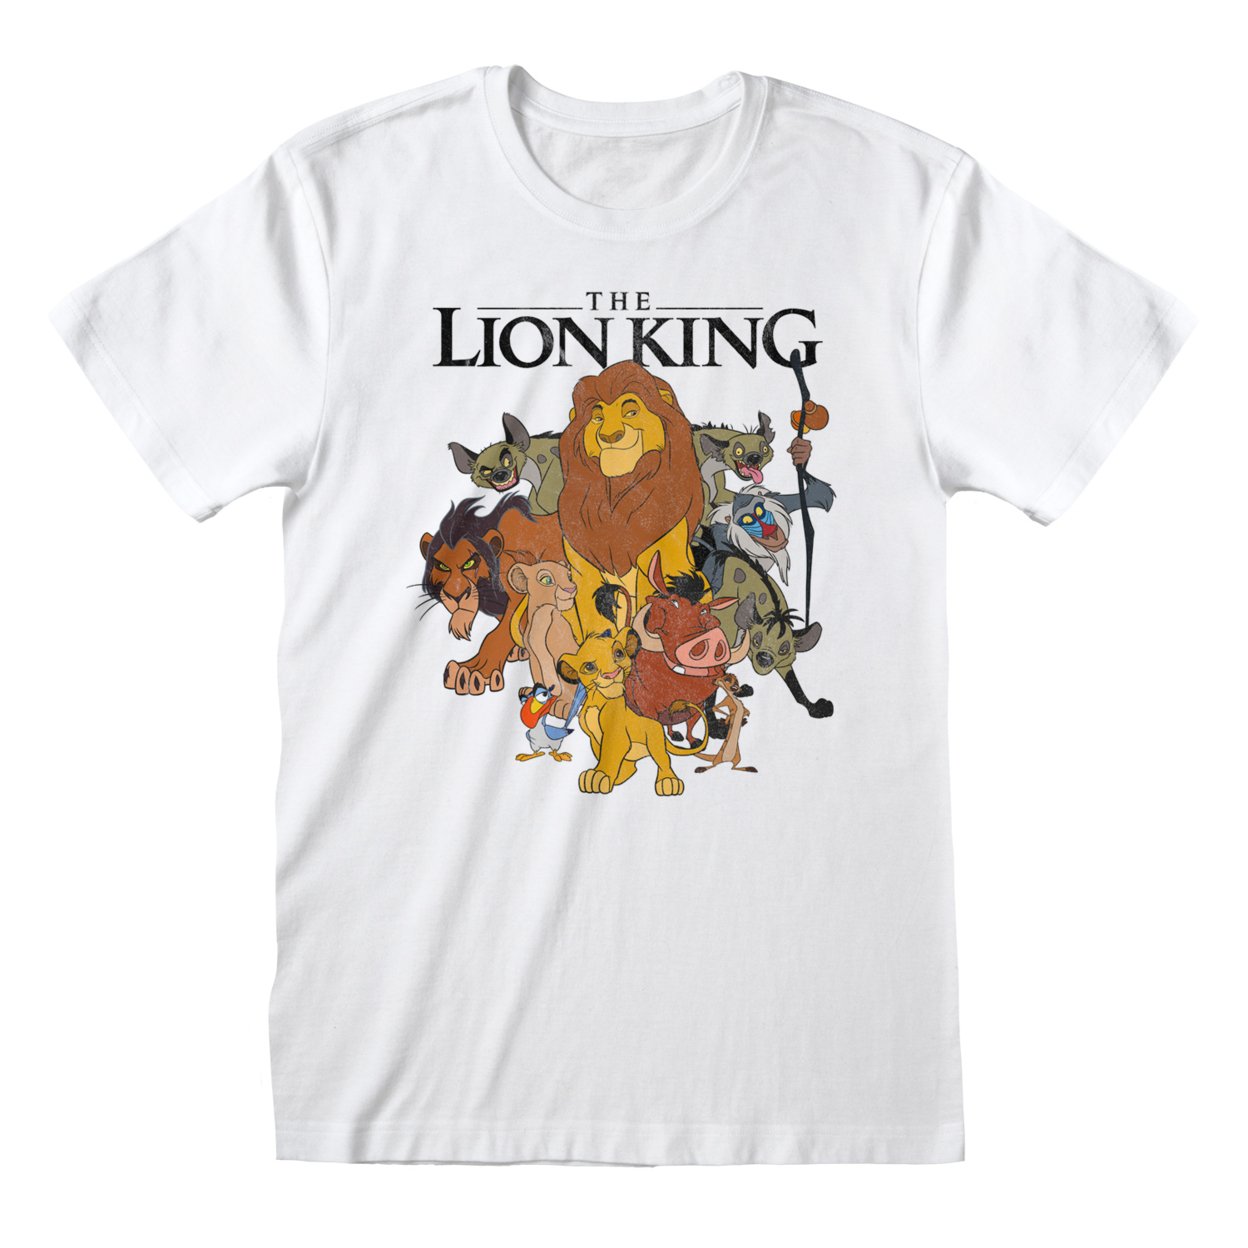 The Lion King Womens/Ladies Group Shot Fitted T-Shirt | eBay